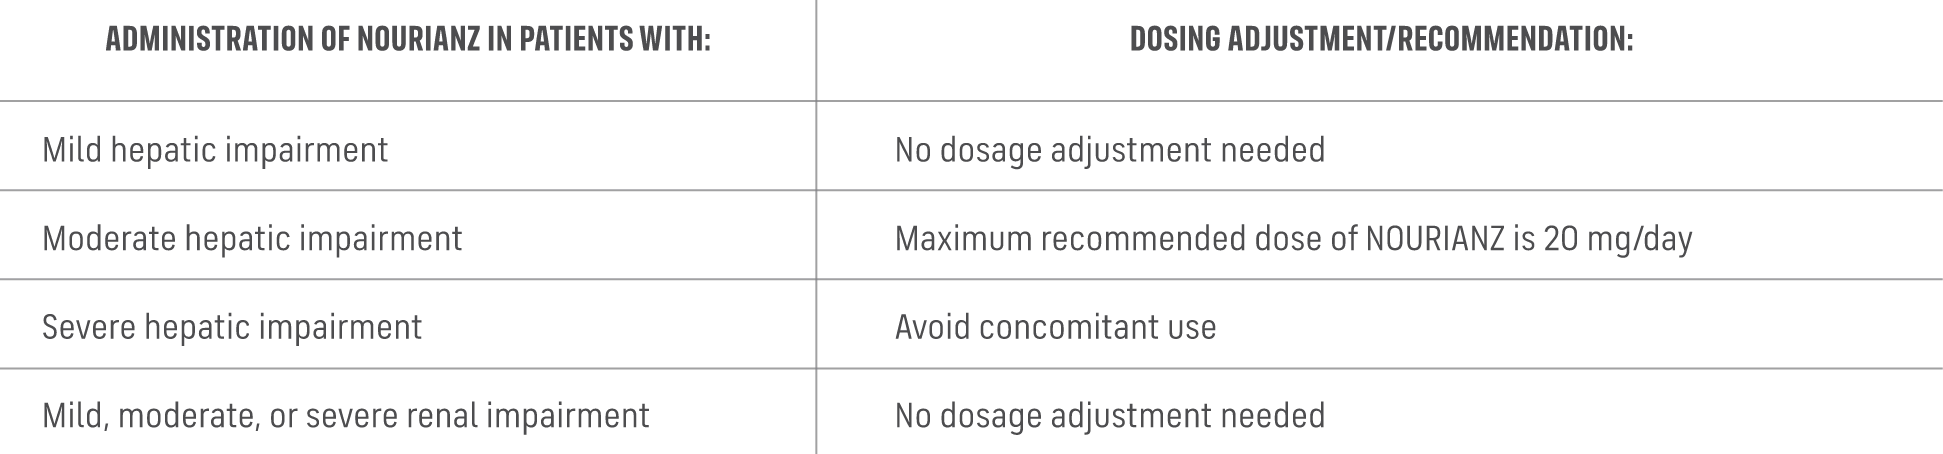 Nourianz recommended dosage chart